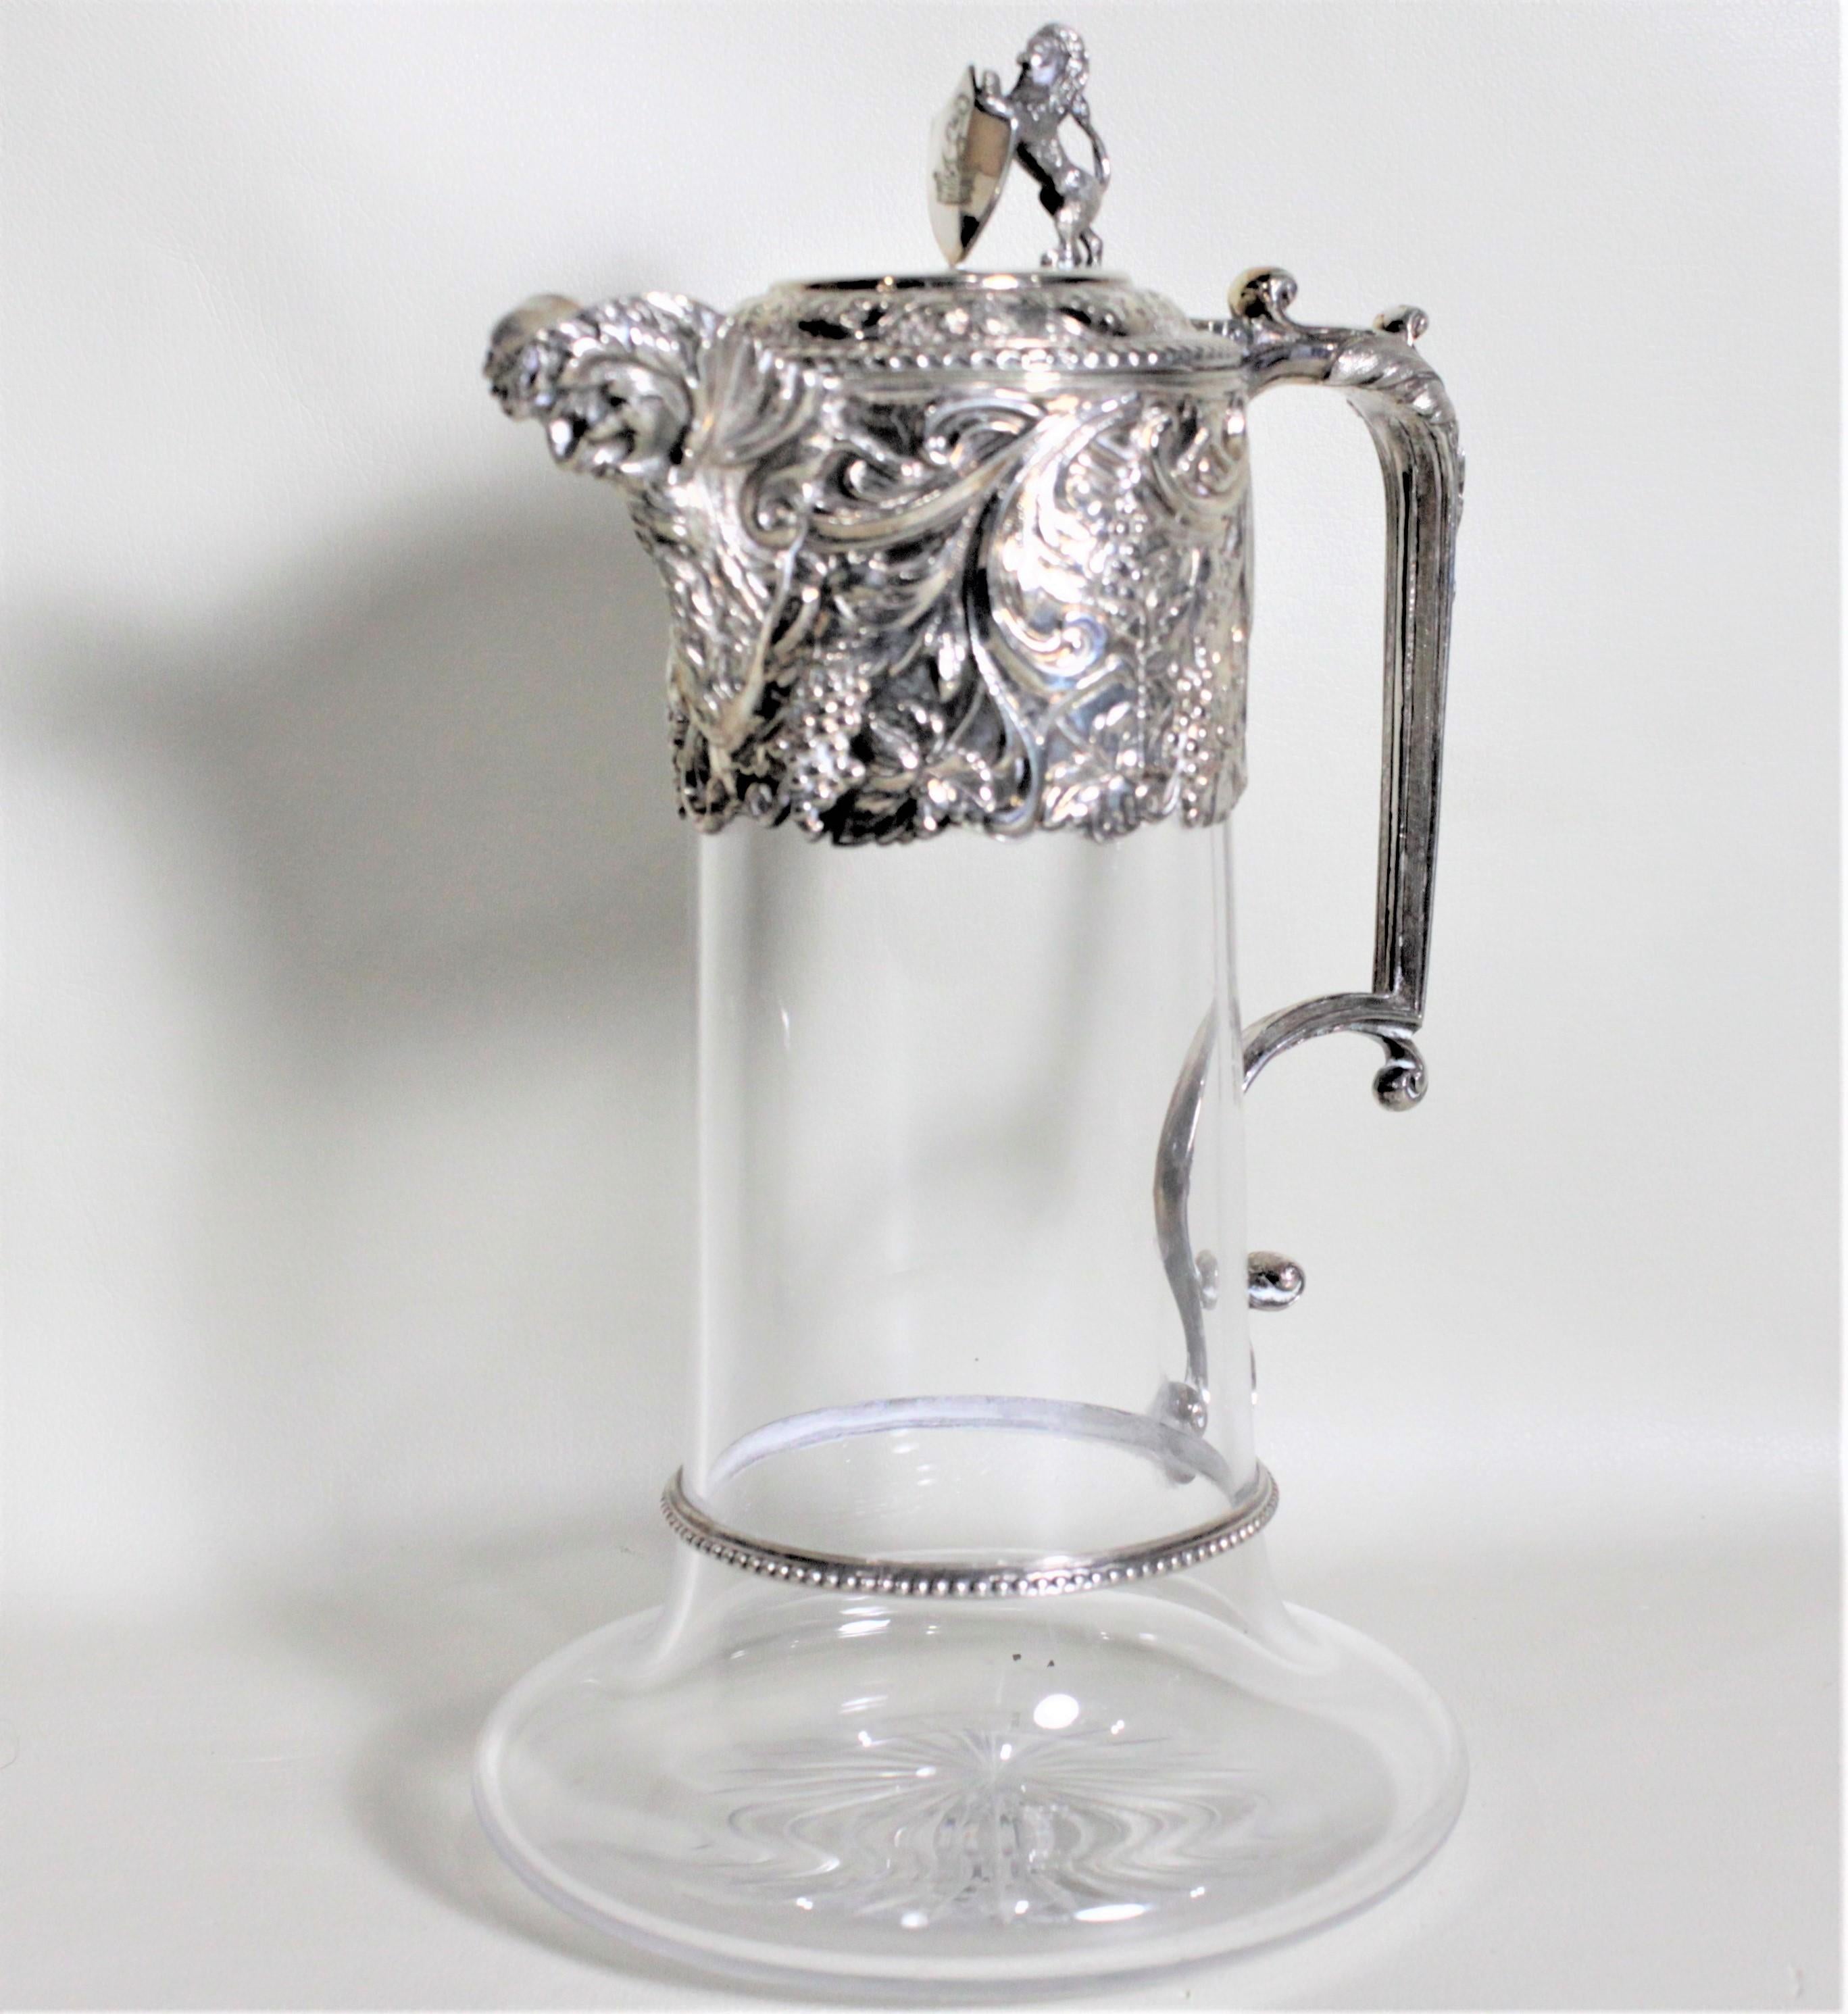 This antique silver plate and cut glass claret jug was most likely made in England in circa 1900 in the Victorian style. The jug features a figural standing lion holding a shield on the top of the ornately decorated raised top with very pronounced